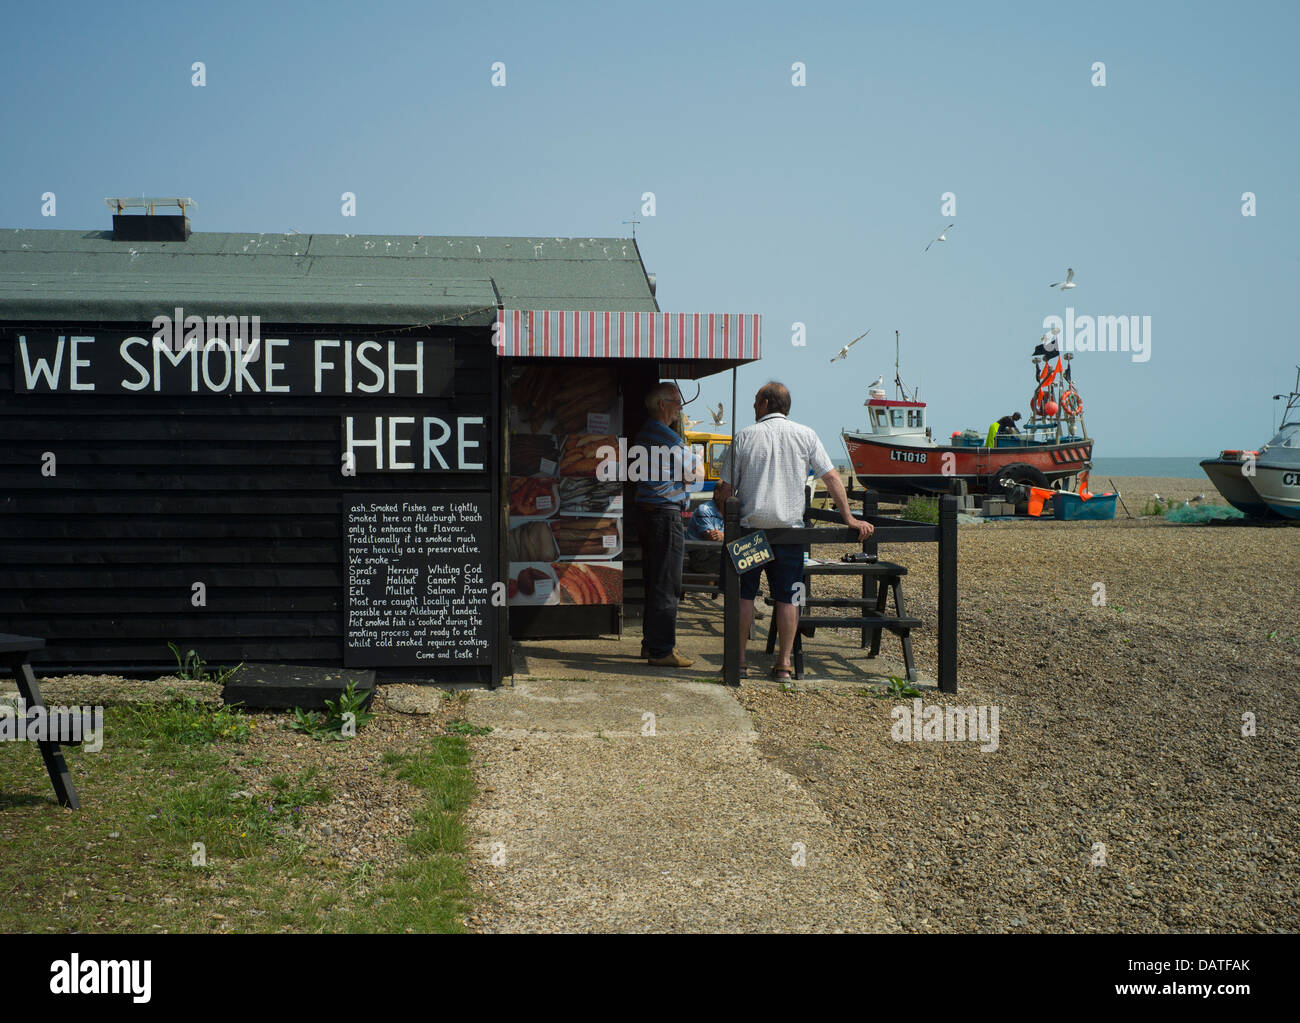 Aldeburgh, on the Suffolk coast attracts visitors from afar to enjoy the Old English charm of this attractive coastal town. Stock Photo